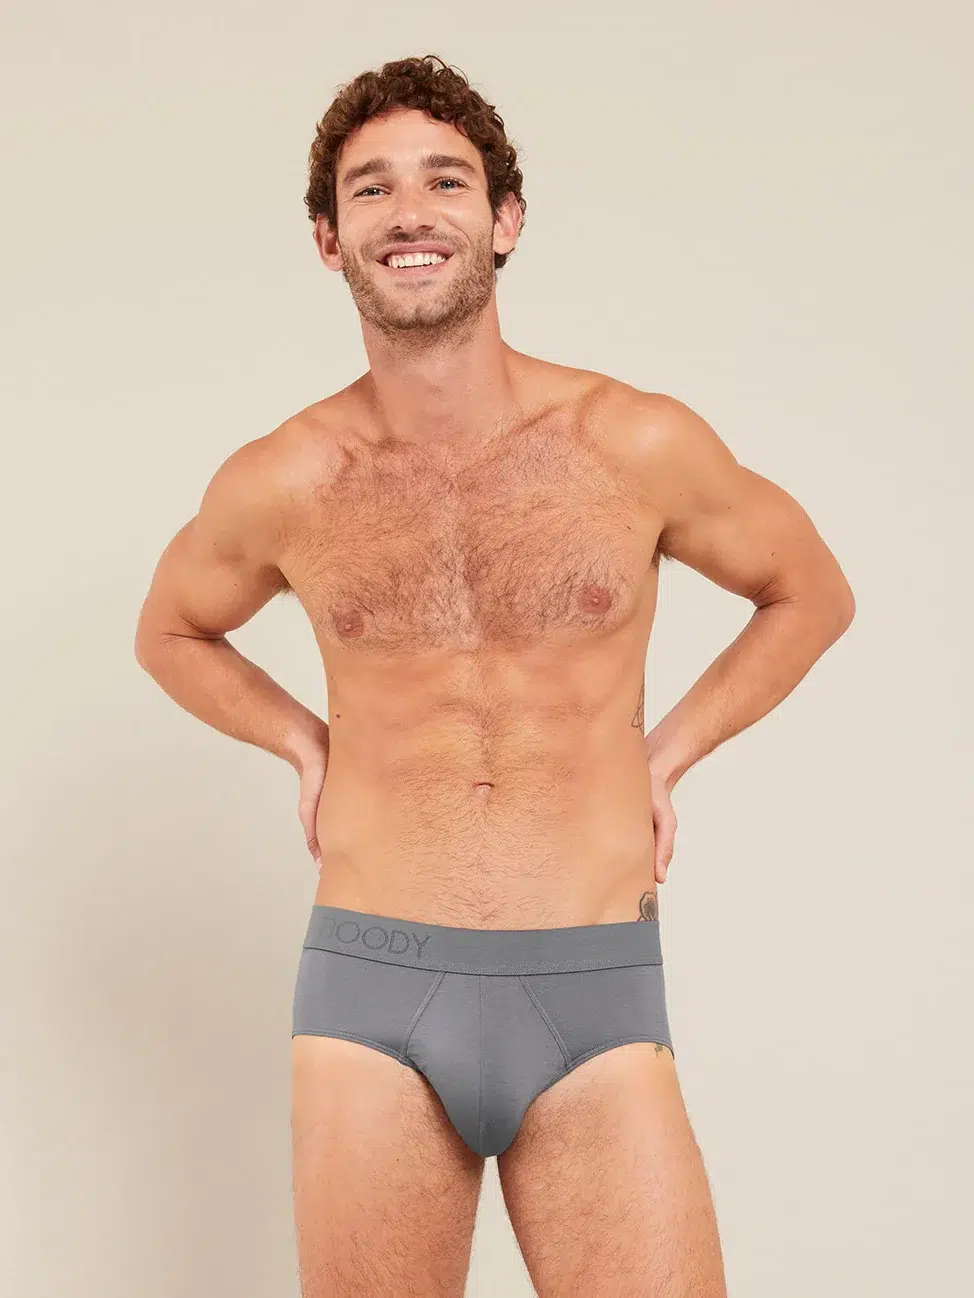 A man stands smiling with his hands on his hips, wearing grey briefs.